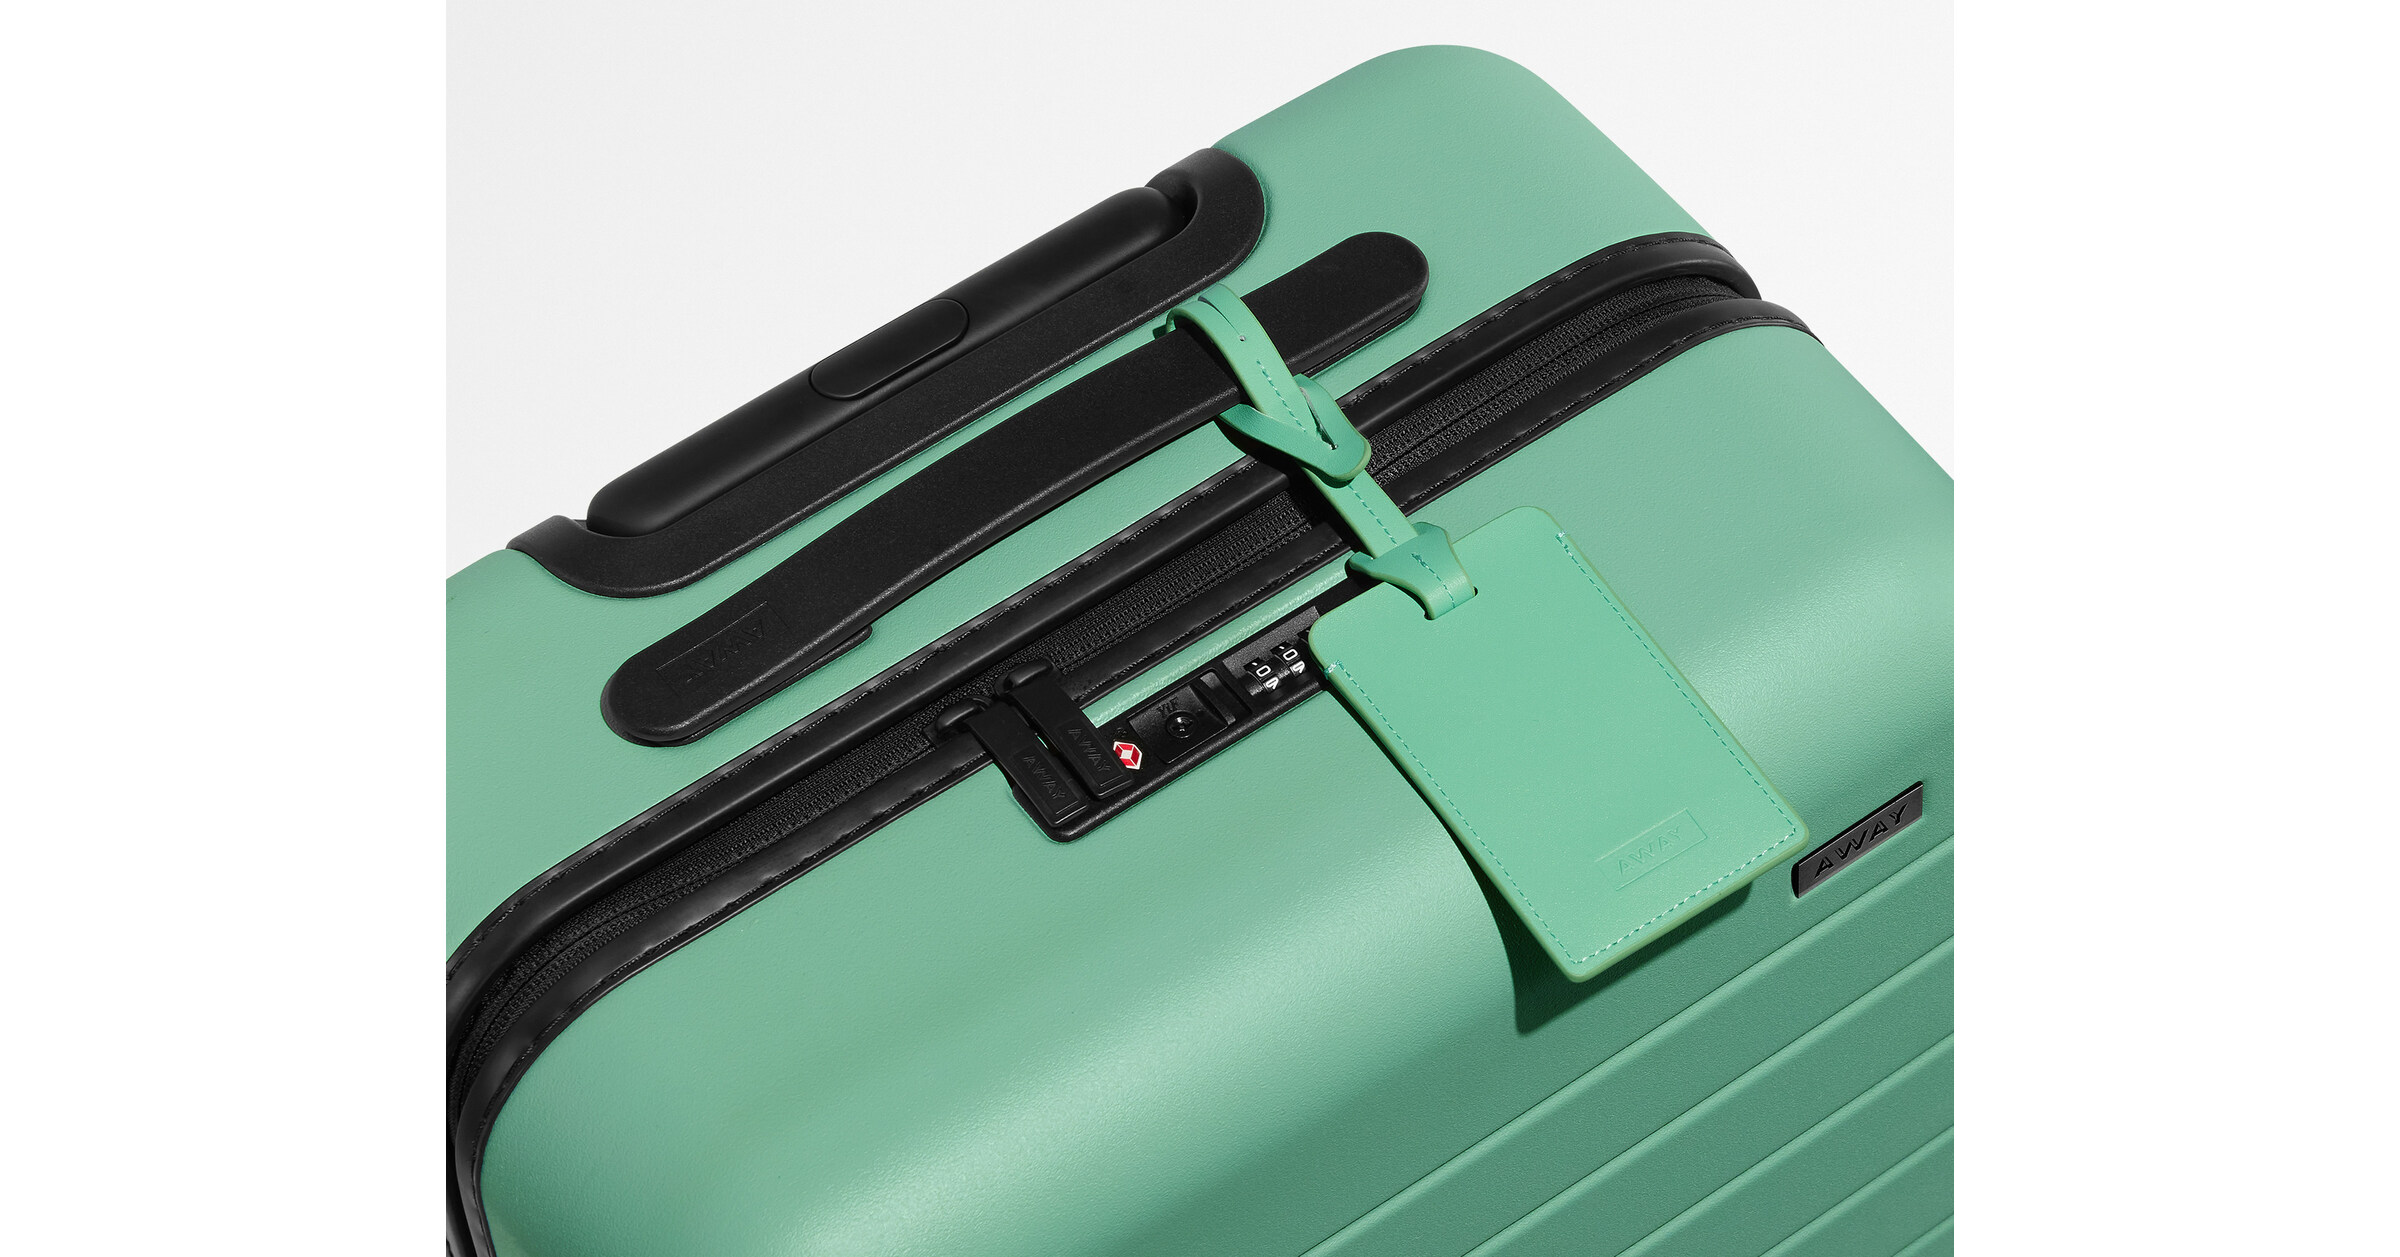 RIMOWA Redesigned Its Iconic Bags In New Signature Colors Inspired